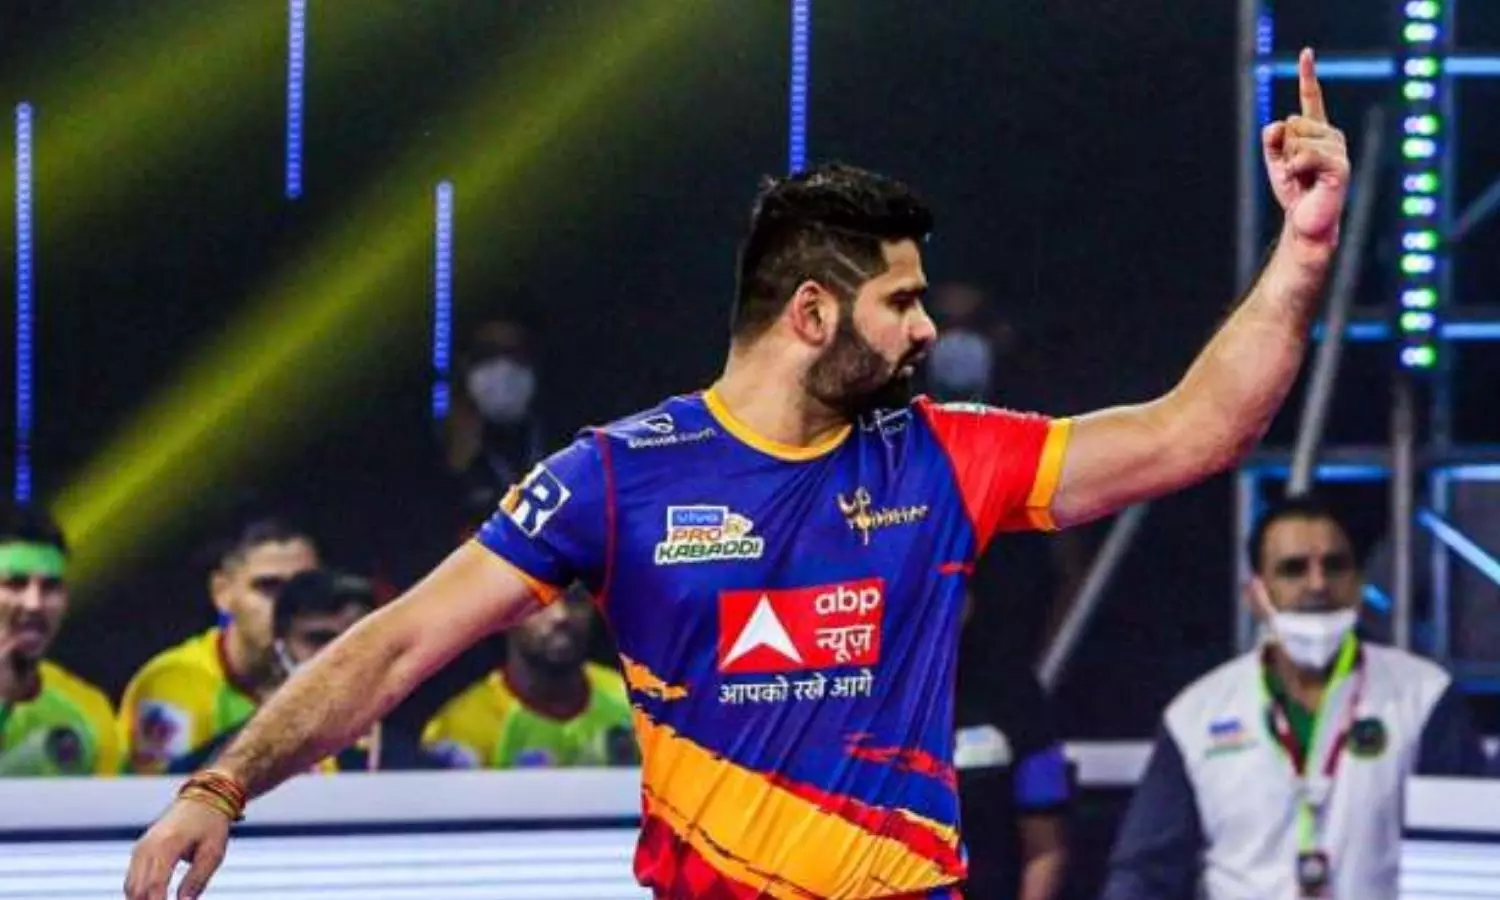 PKL 2021: 5 lesser known facts about the Kabaddi journey of Pardeep Narwal